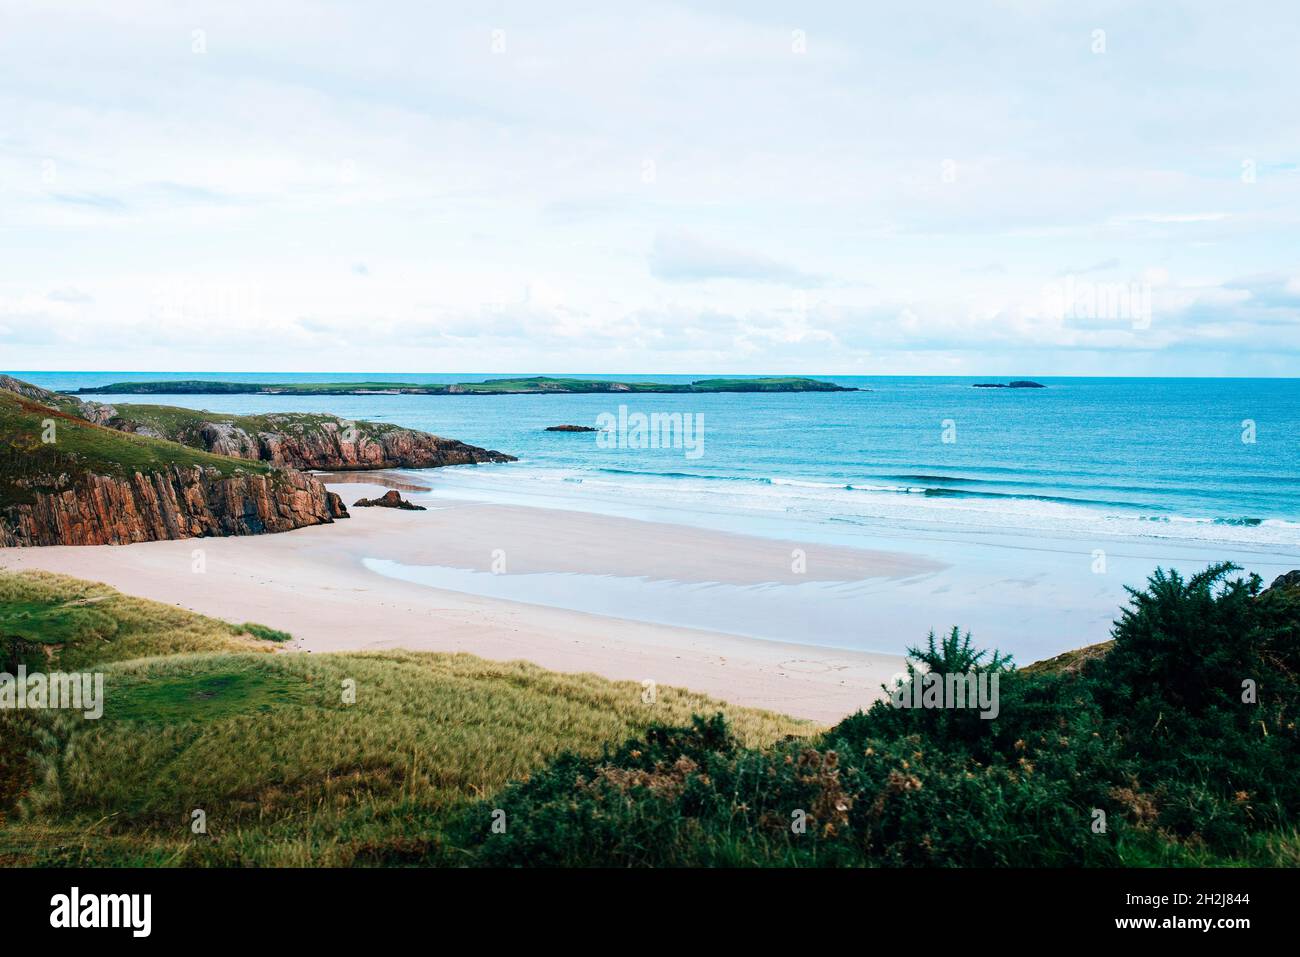 view of CEANNABEINNE BEACH on the nc500 road trip route in scotland Stock Photo